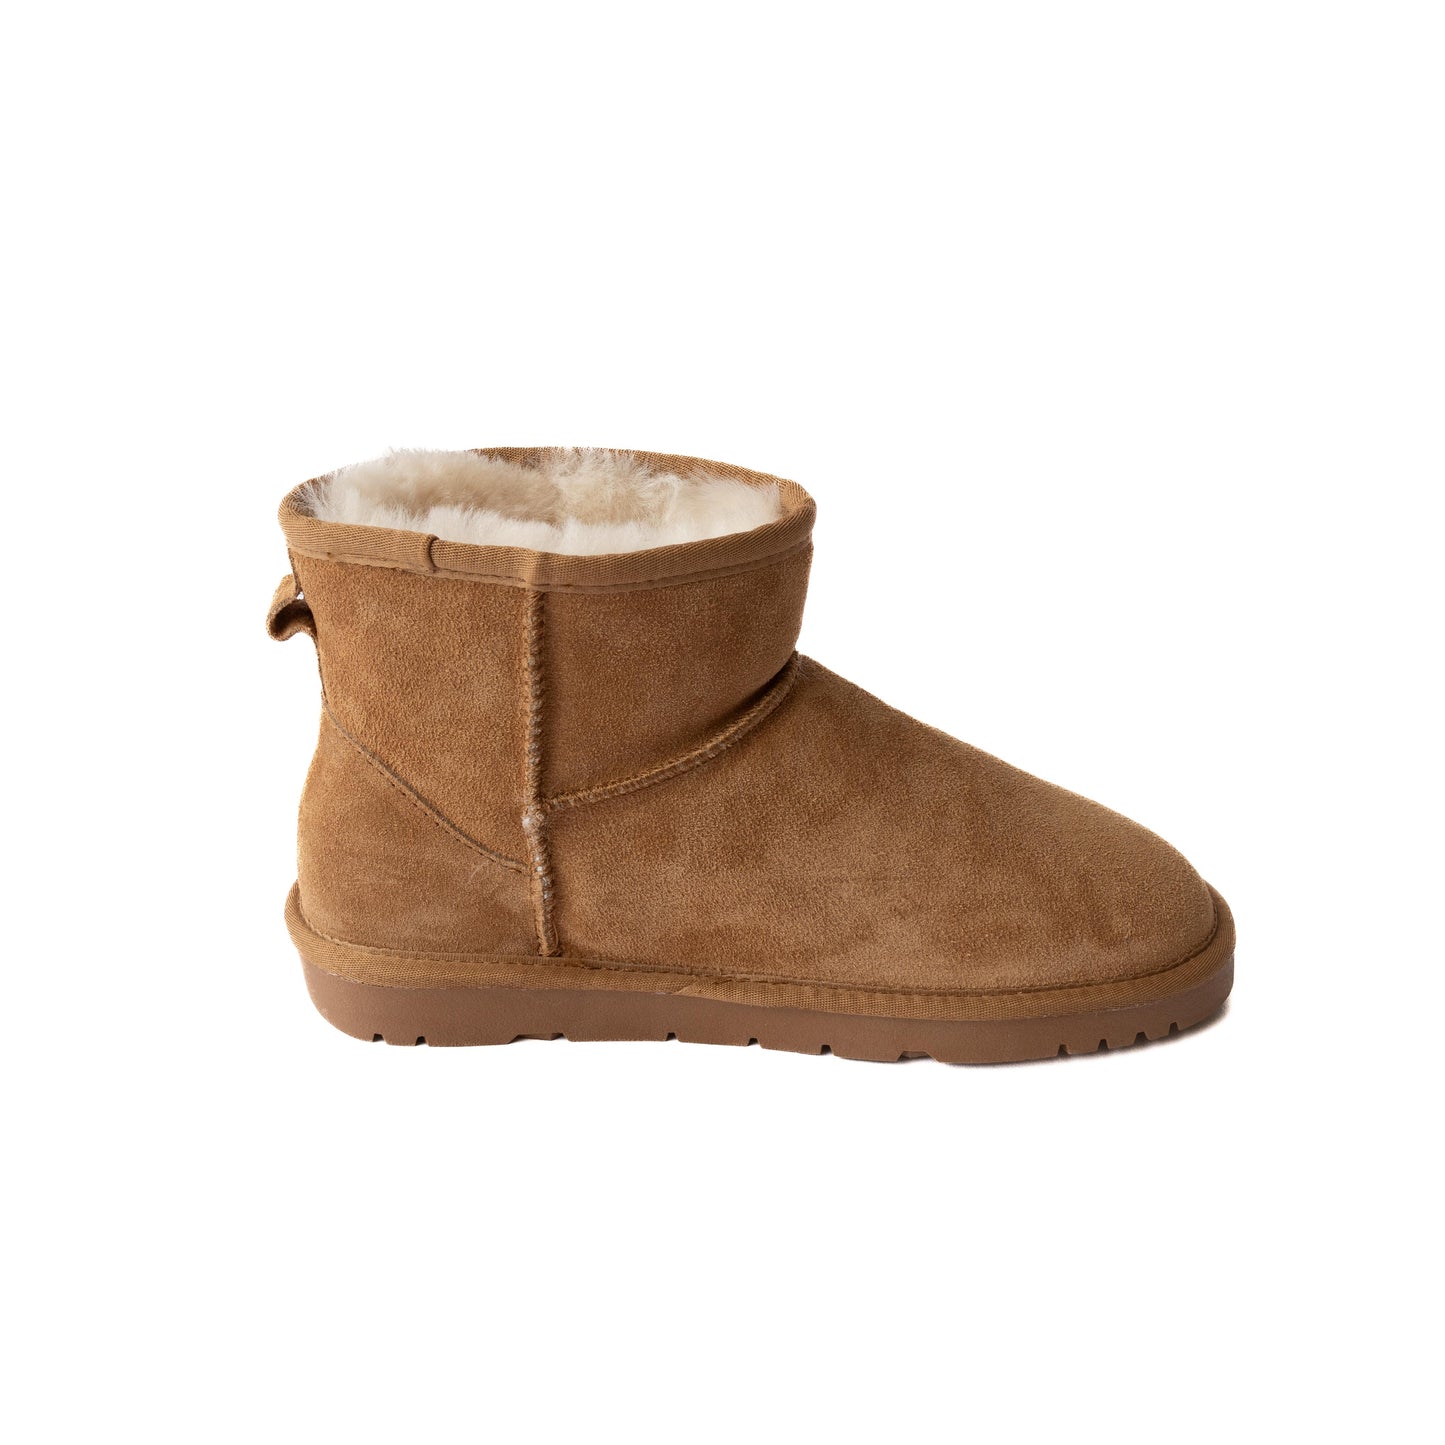 Classic Sheepskin Ankle Boot Natural/Tan